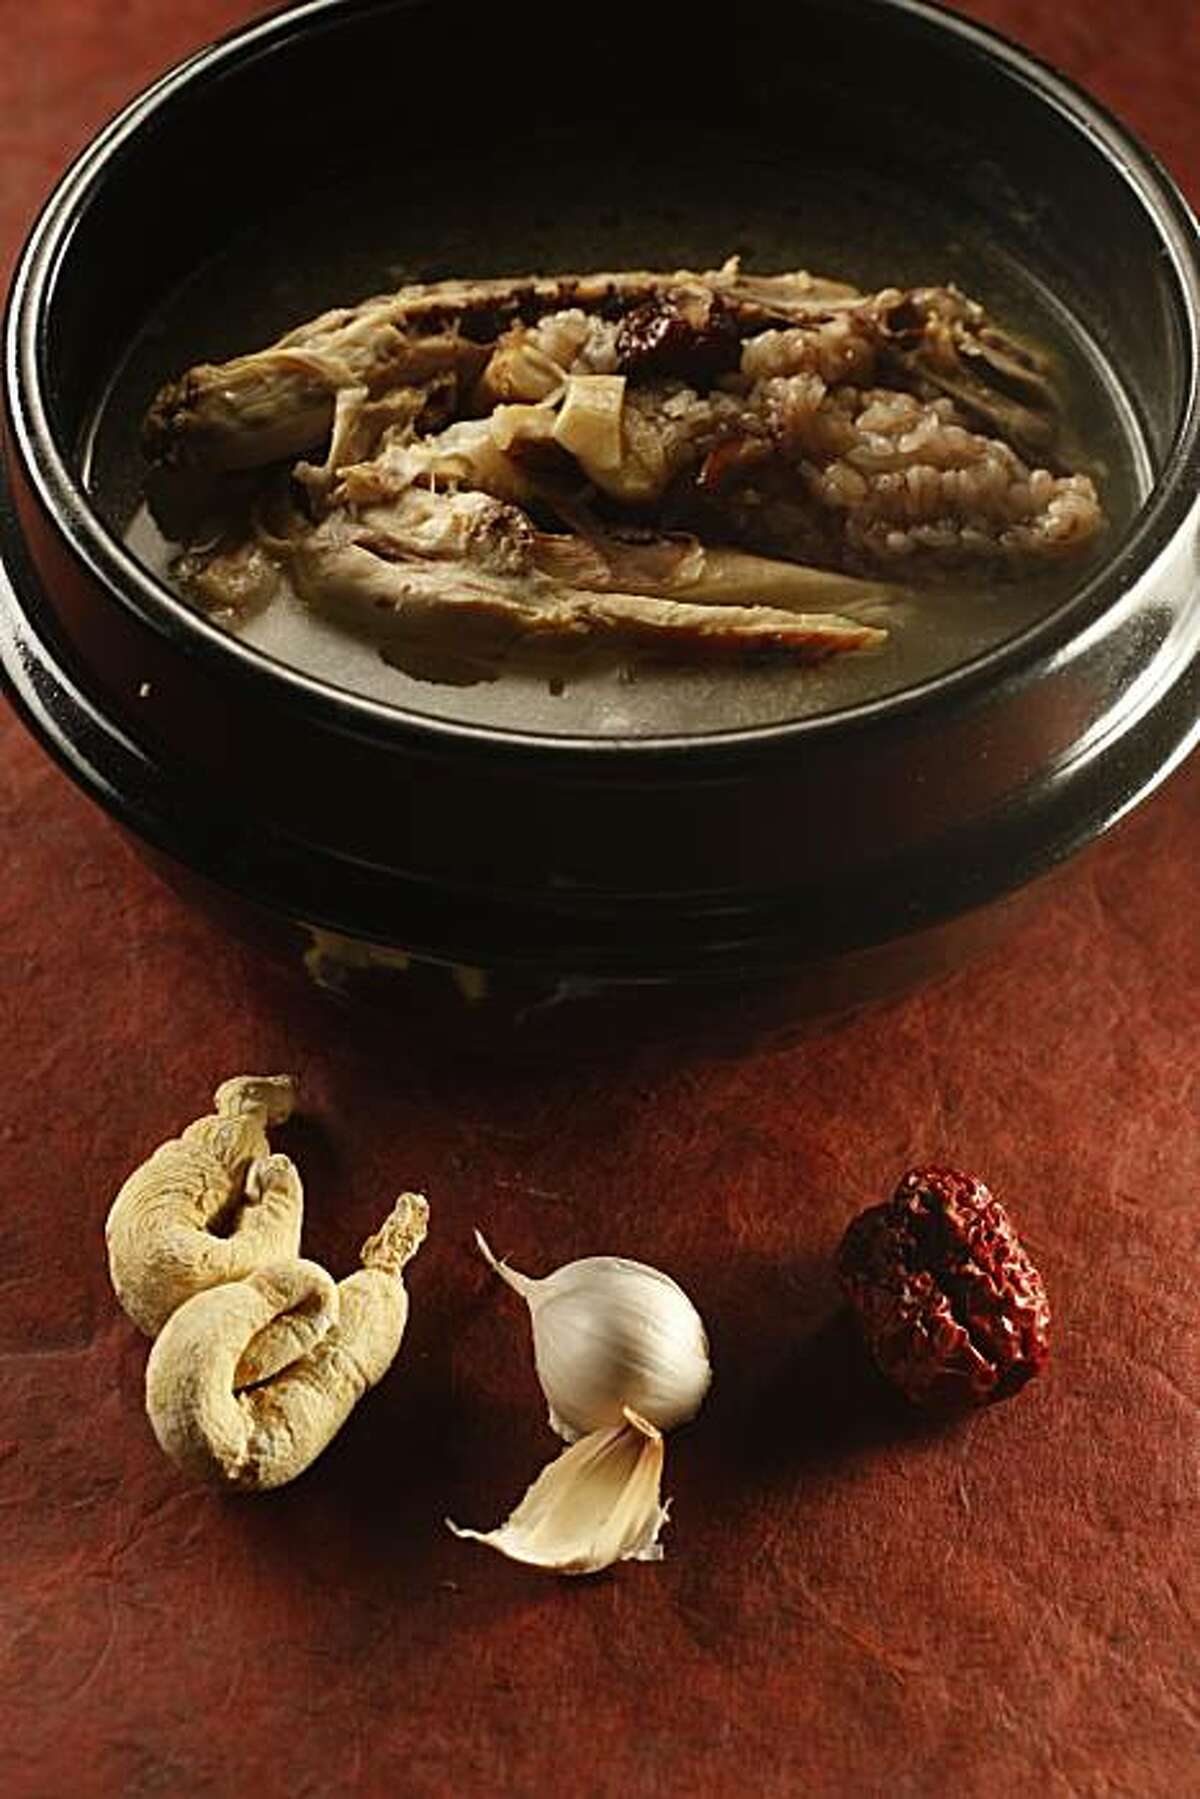 Korean Chicken and Ginseng soup with it's ingredients, in San Francisco, Calif., on January 21, 2009. Food styled by Cindy Lee.